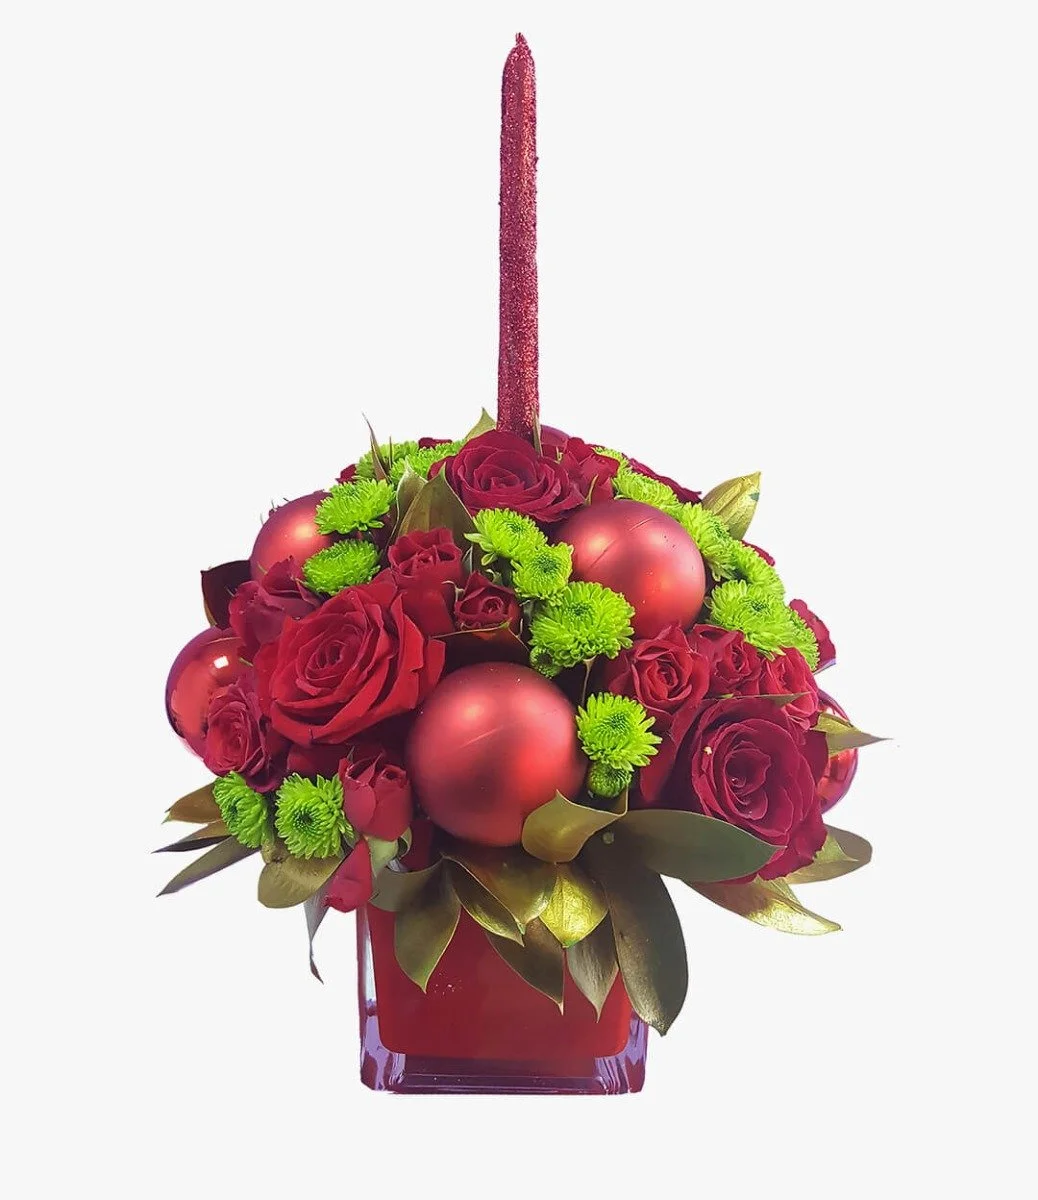 Wish A Special Holiday Flower Bouquet